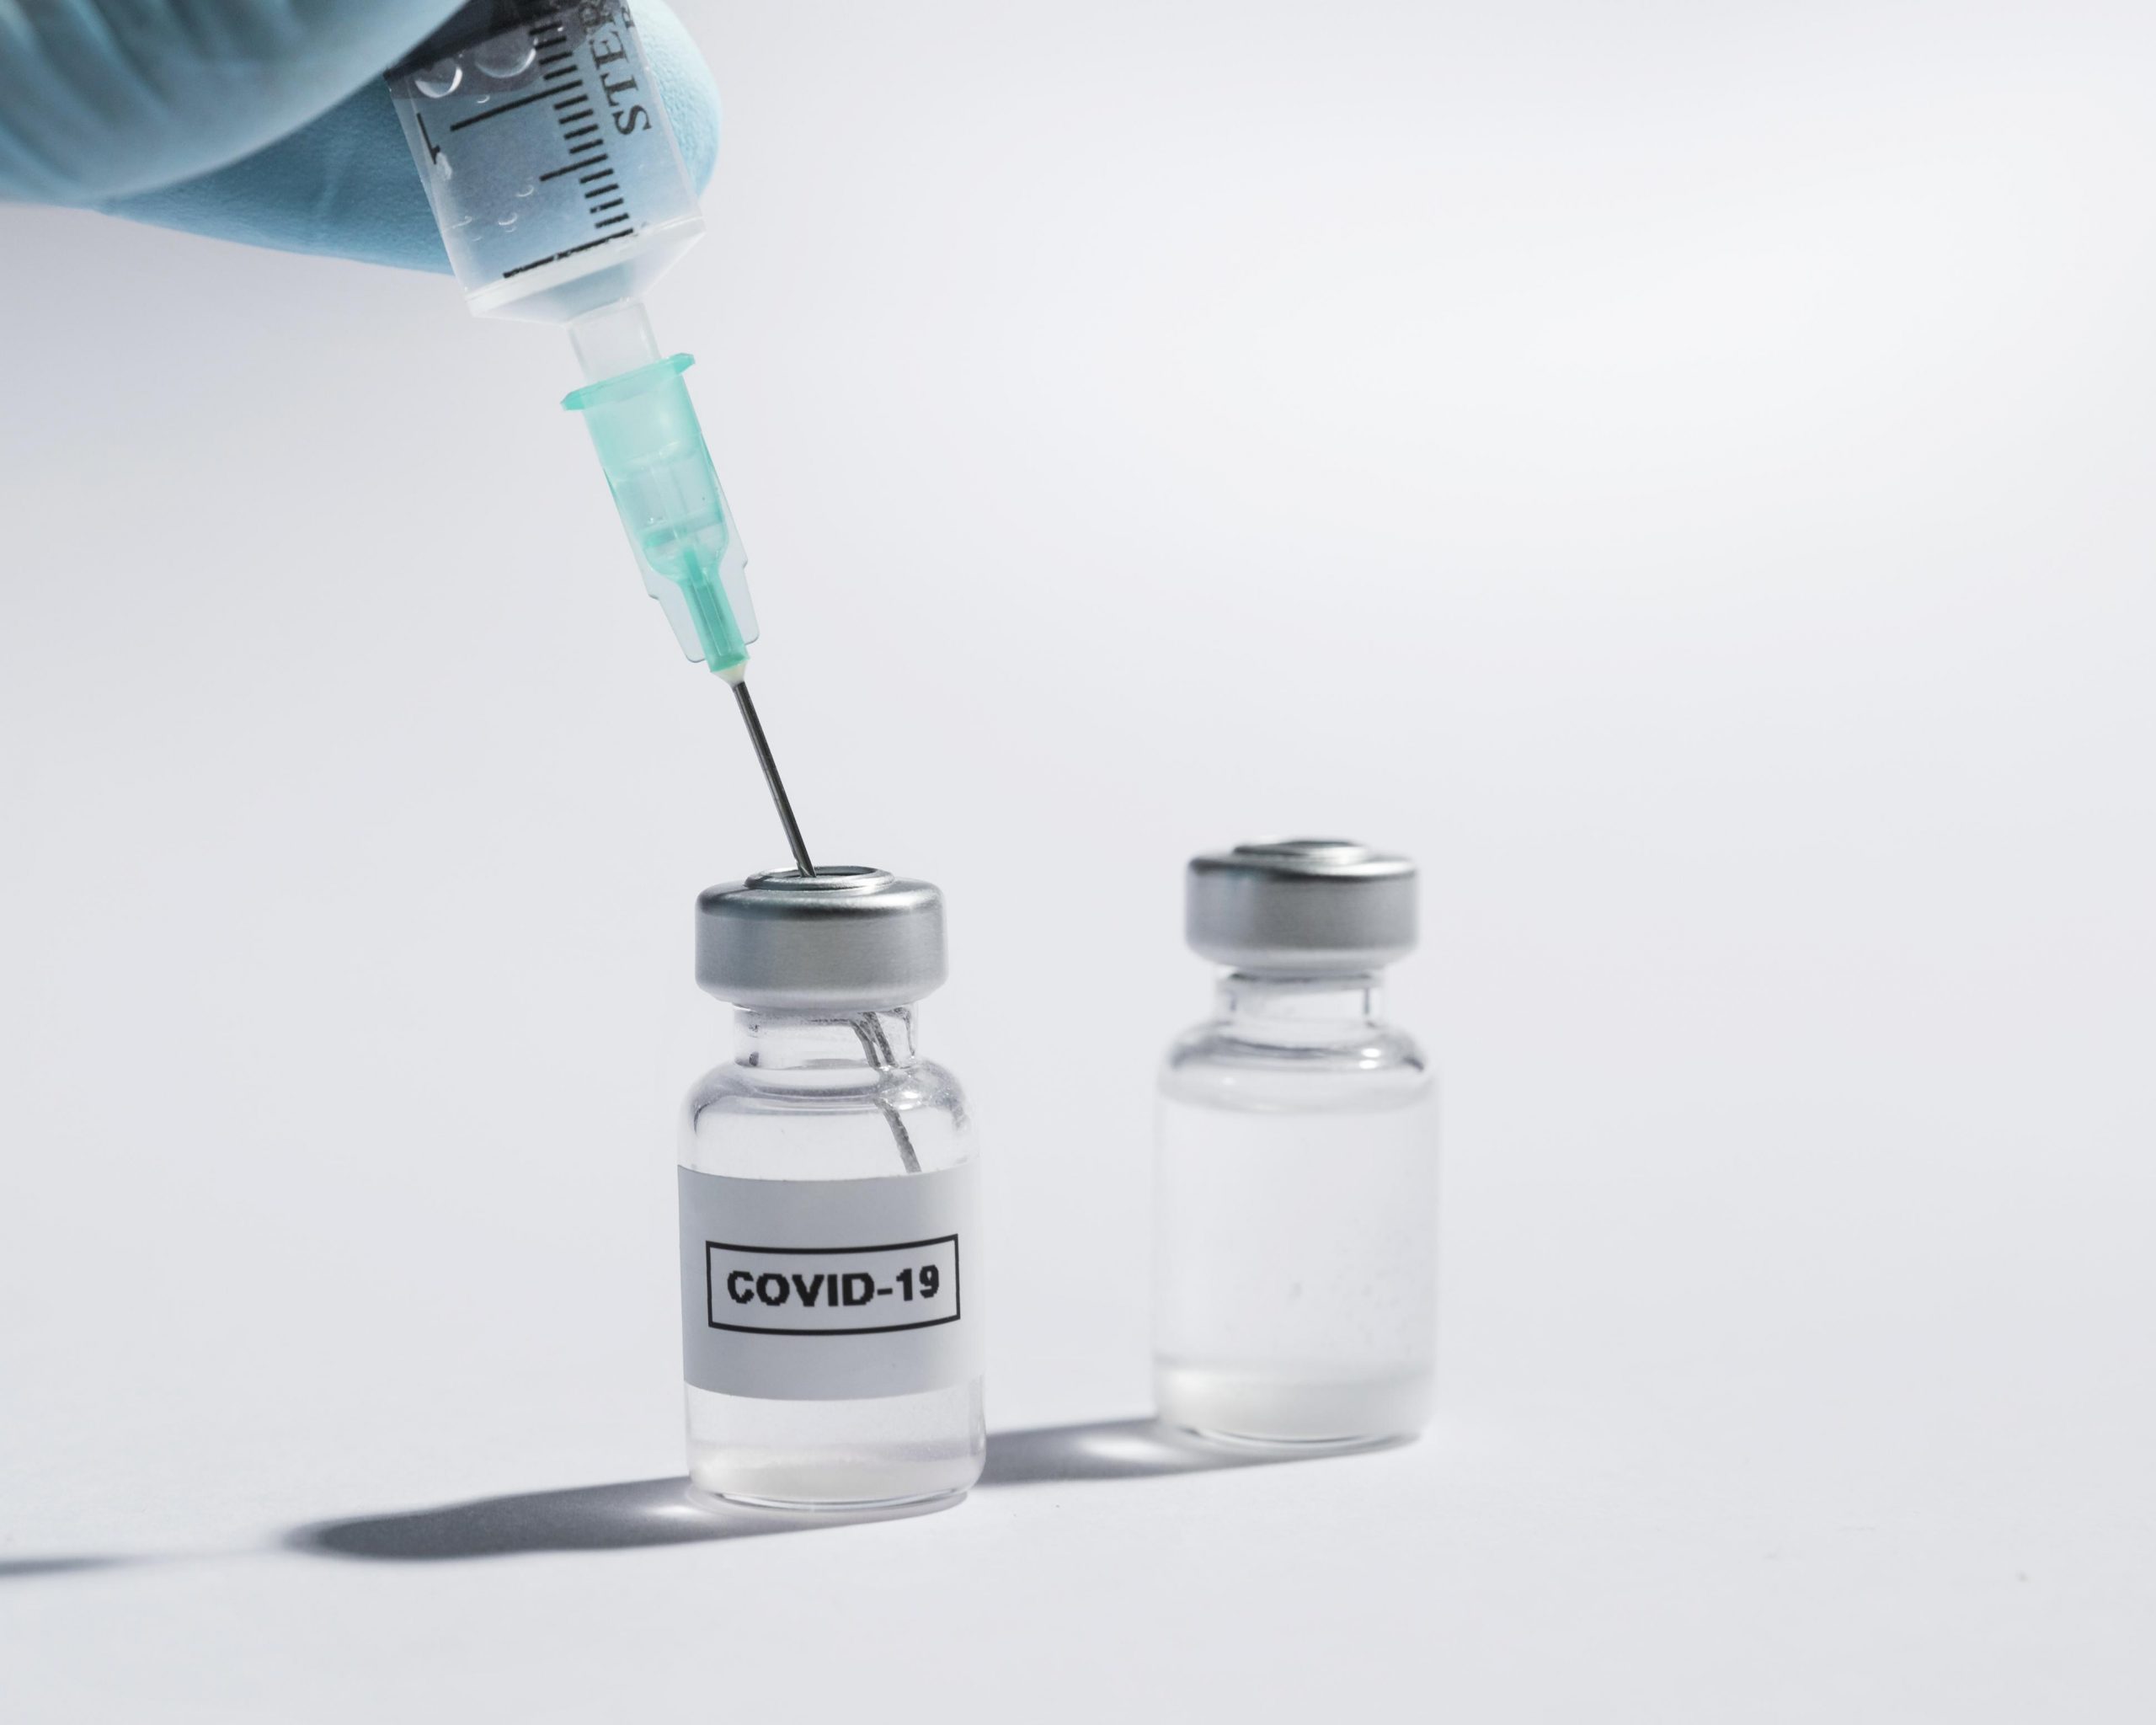 COVID-19 – Indonesia to secure 100 million doses of AstraZeneca’s vaccines by 2021